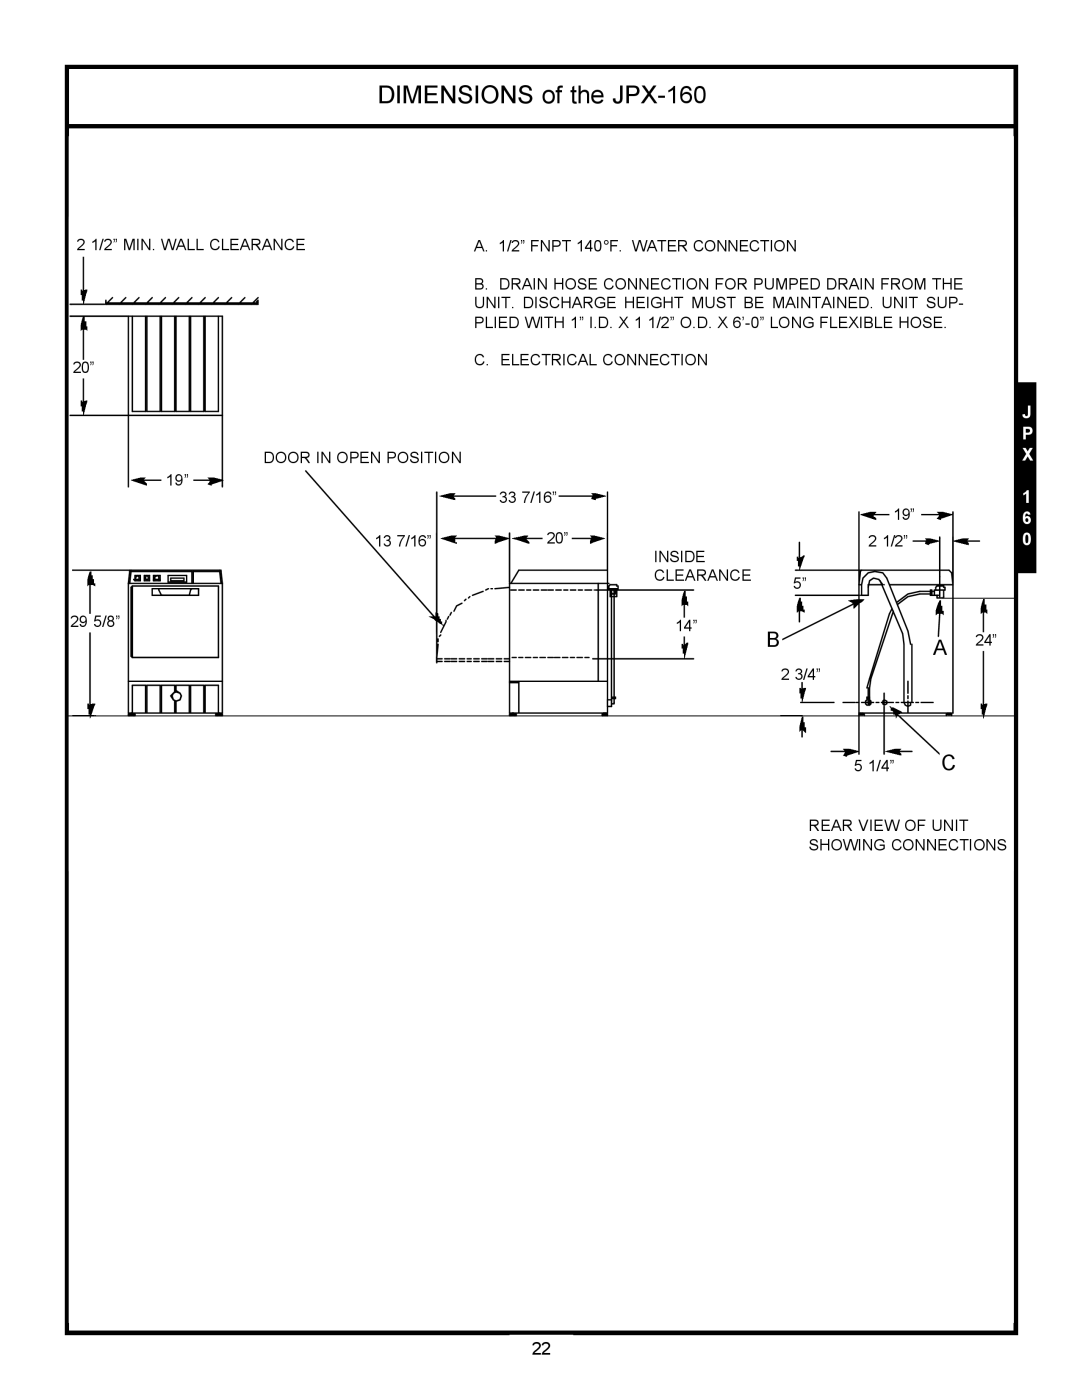 Jackson JPX-200, jpx-140 service manual DIMENSIONS of the JPX-160, 2 3/4” 